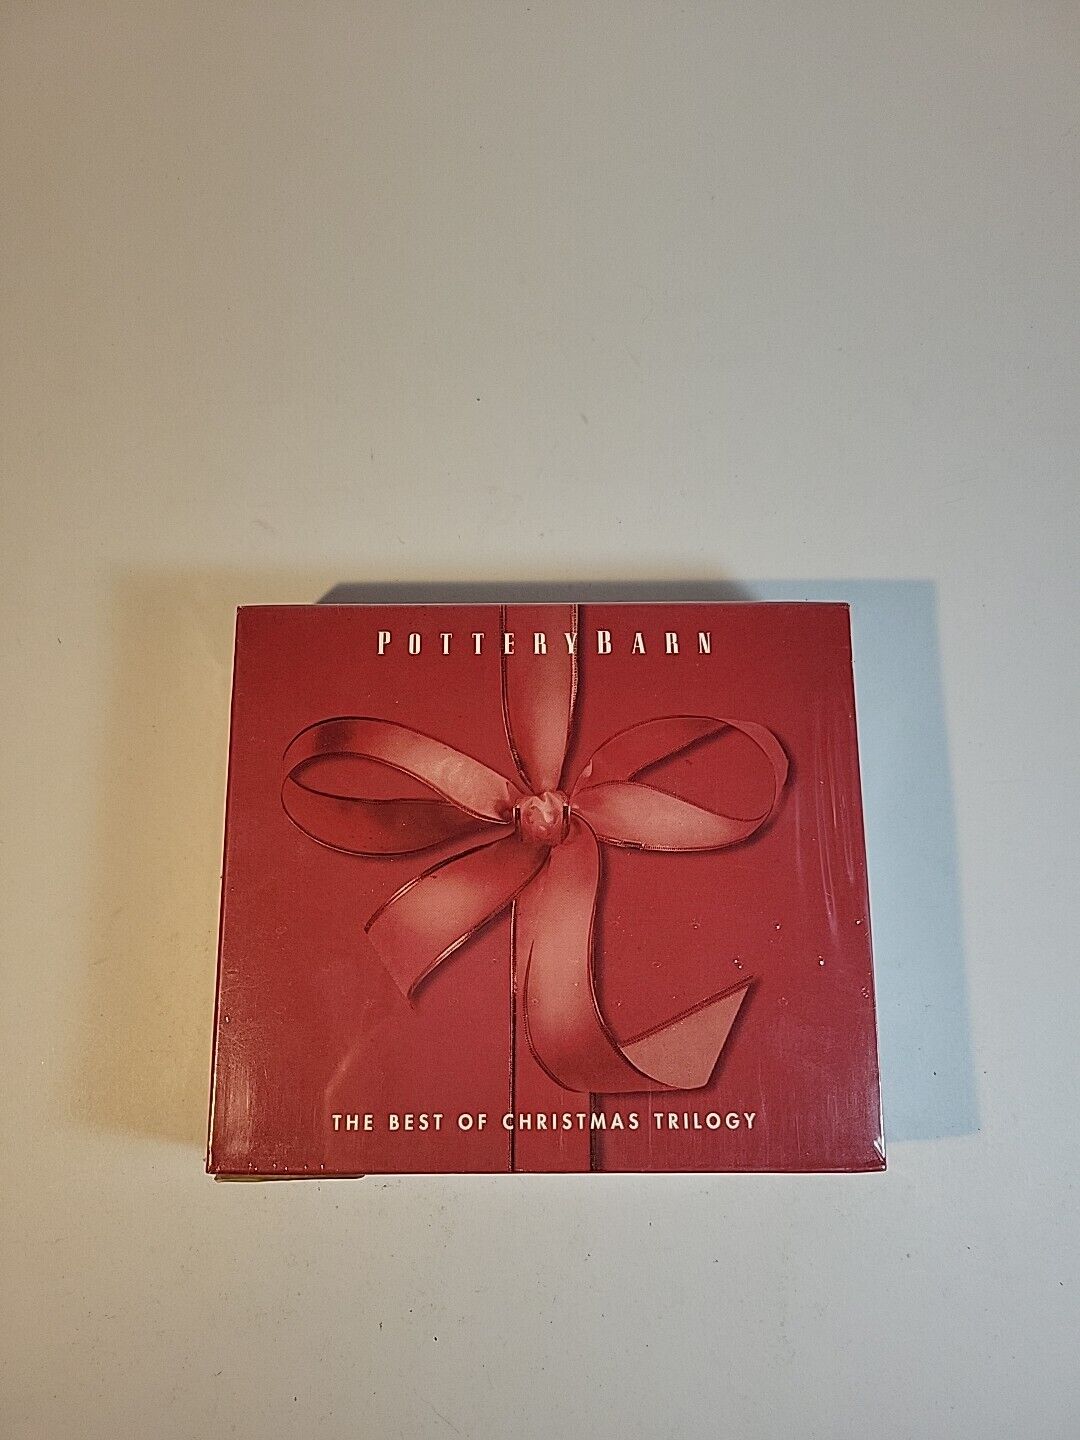 Pottery Barn Best of Christmas Trilogy Audio CD